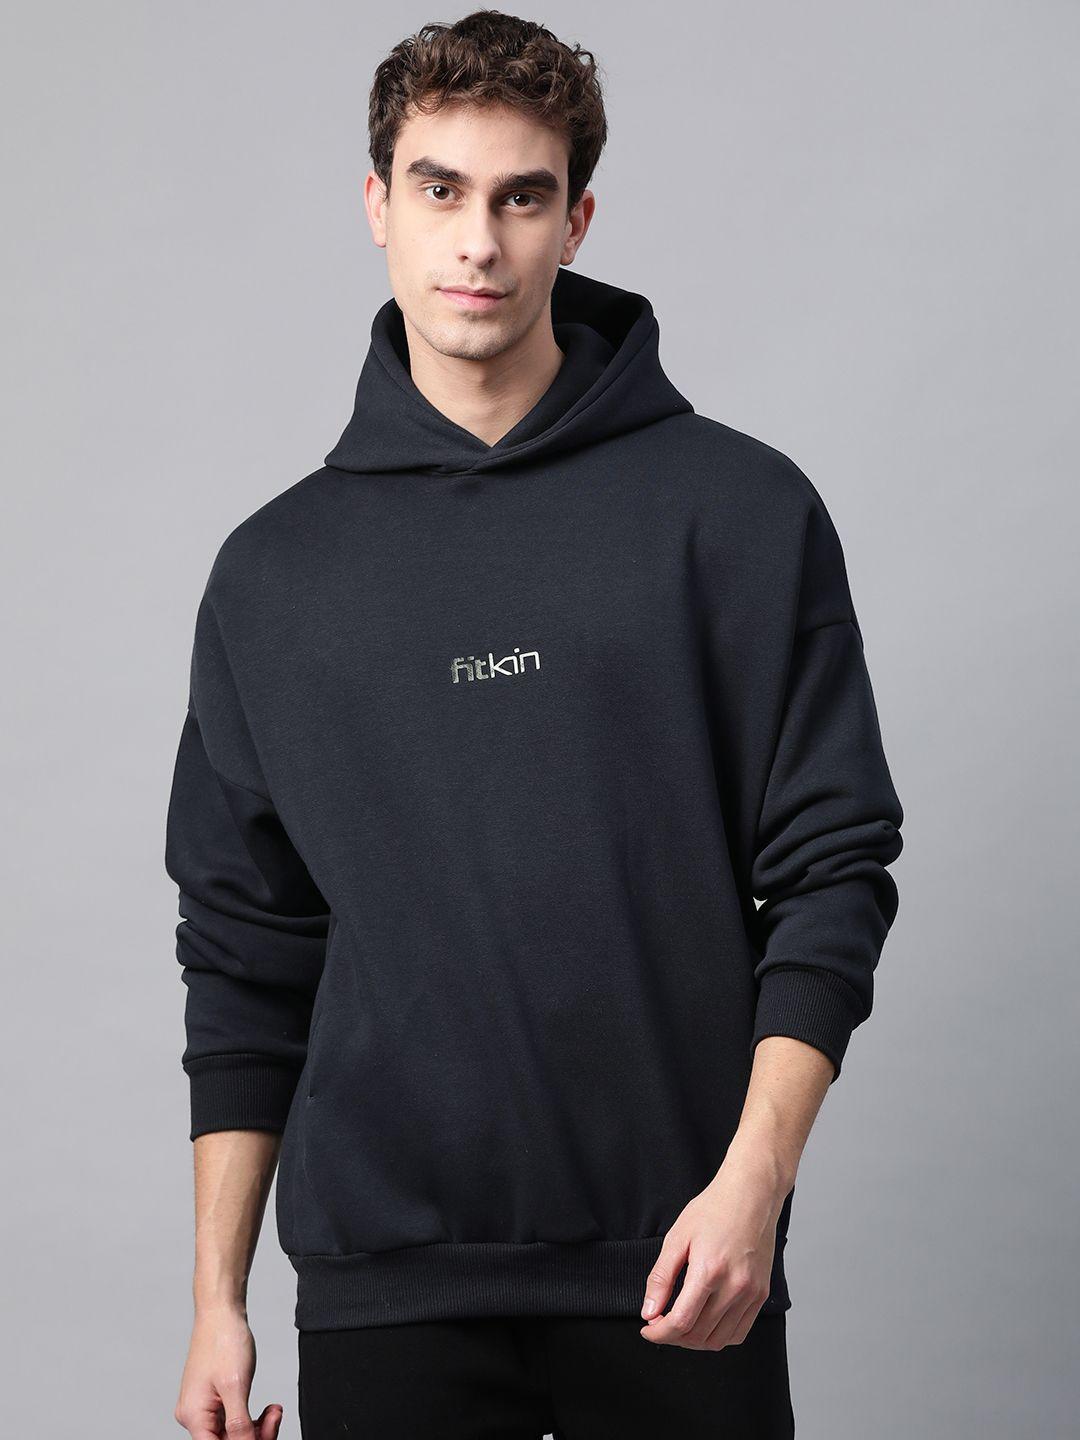 fitkin men navy blue solid hooded winter sweatshirt with brand logo print detail